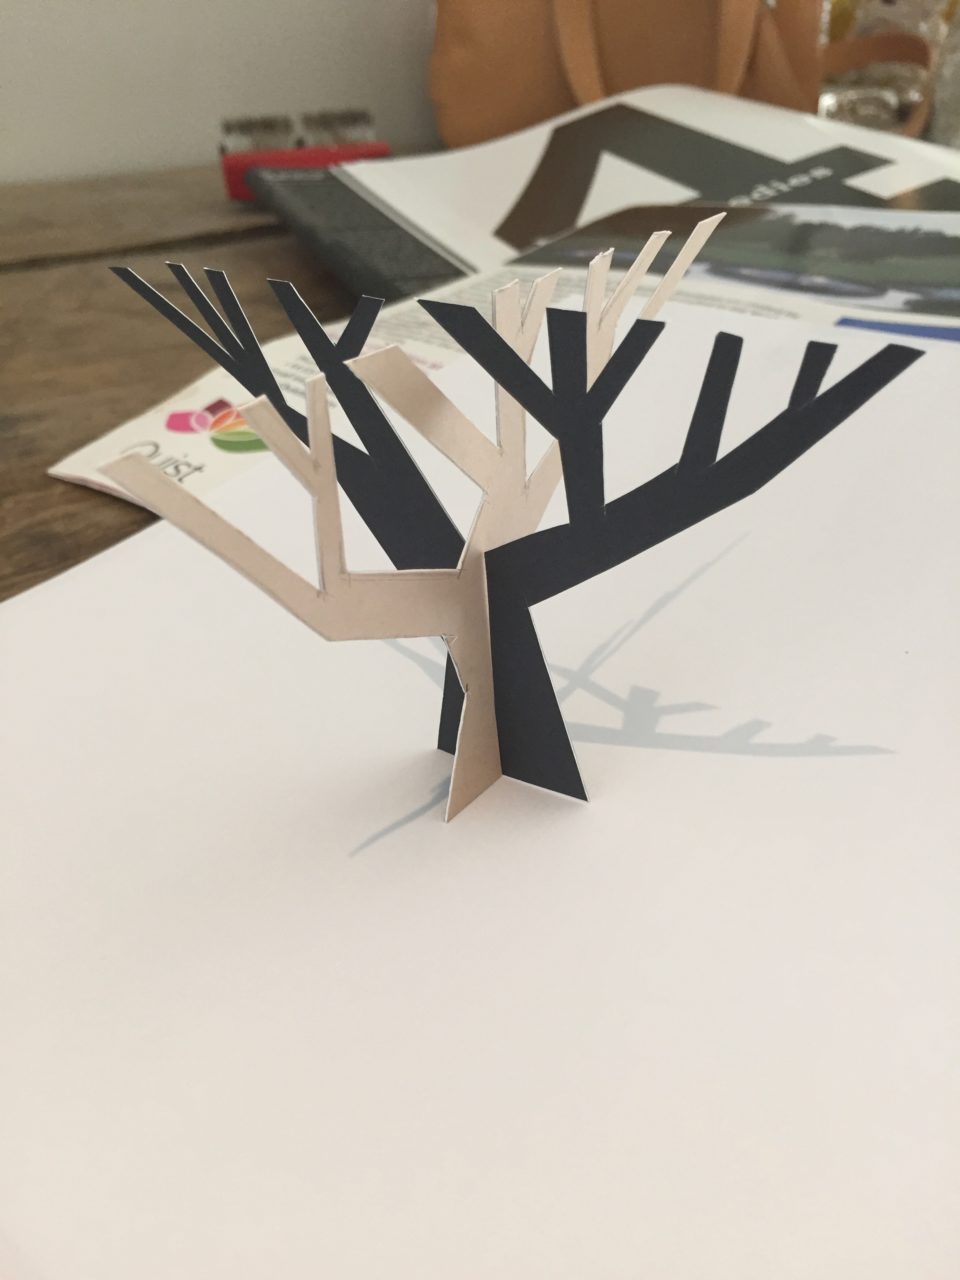 This is my maquette for a corten tree